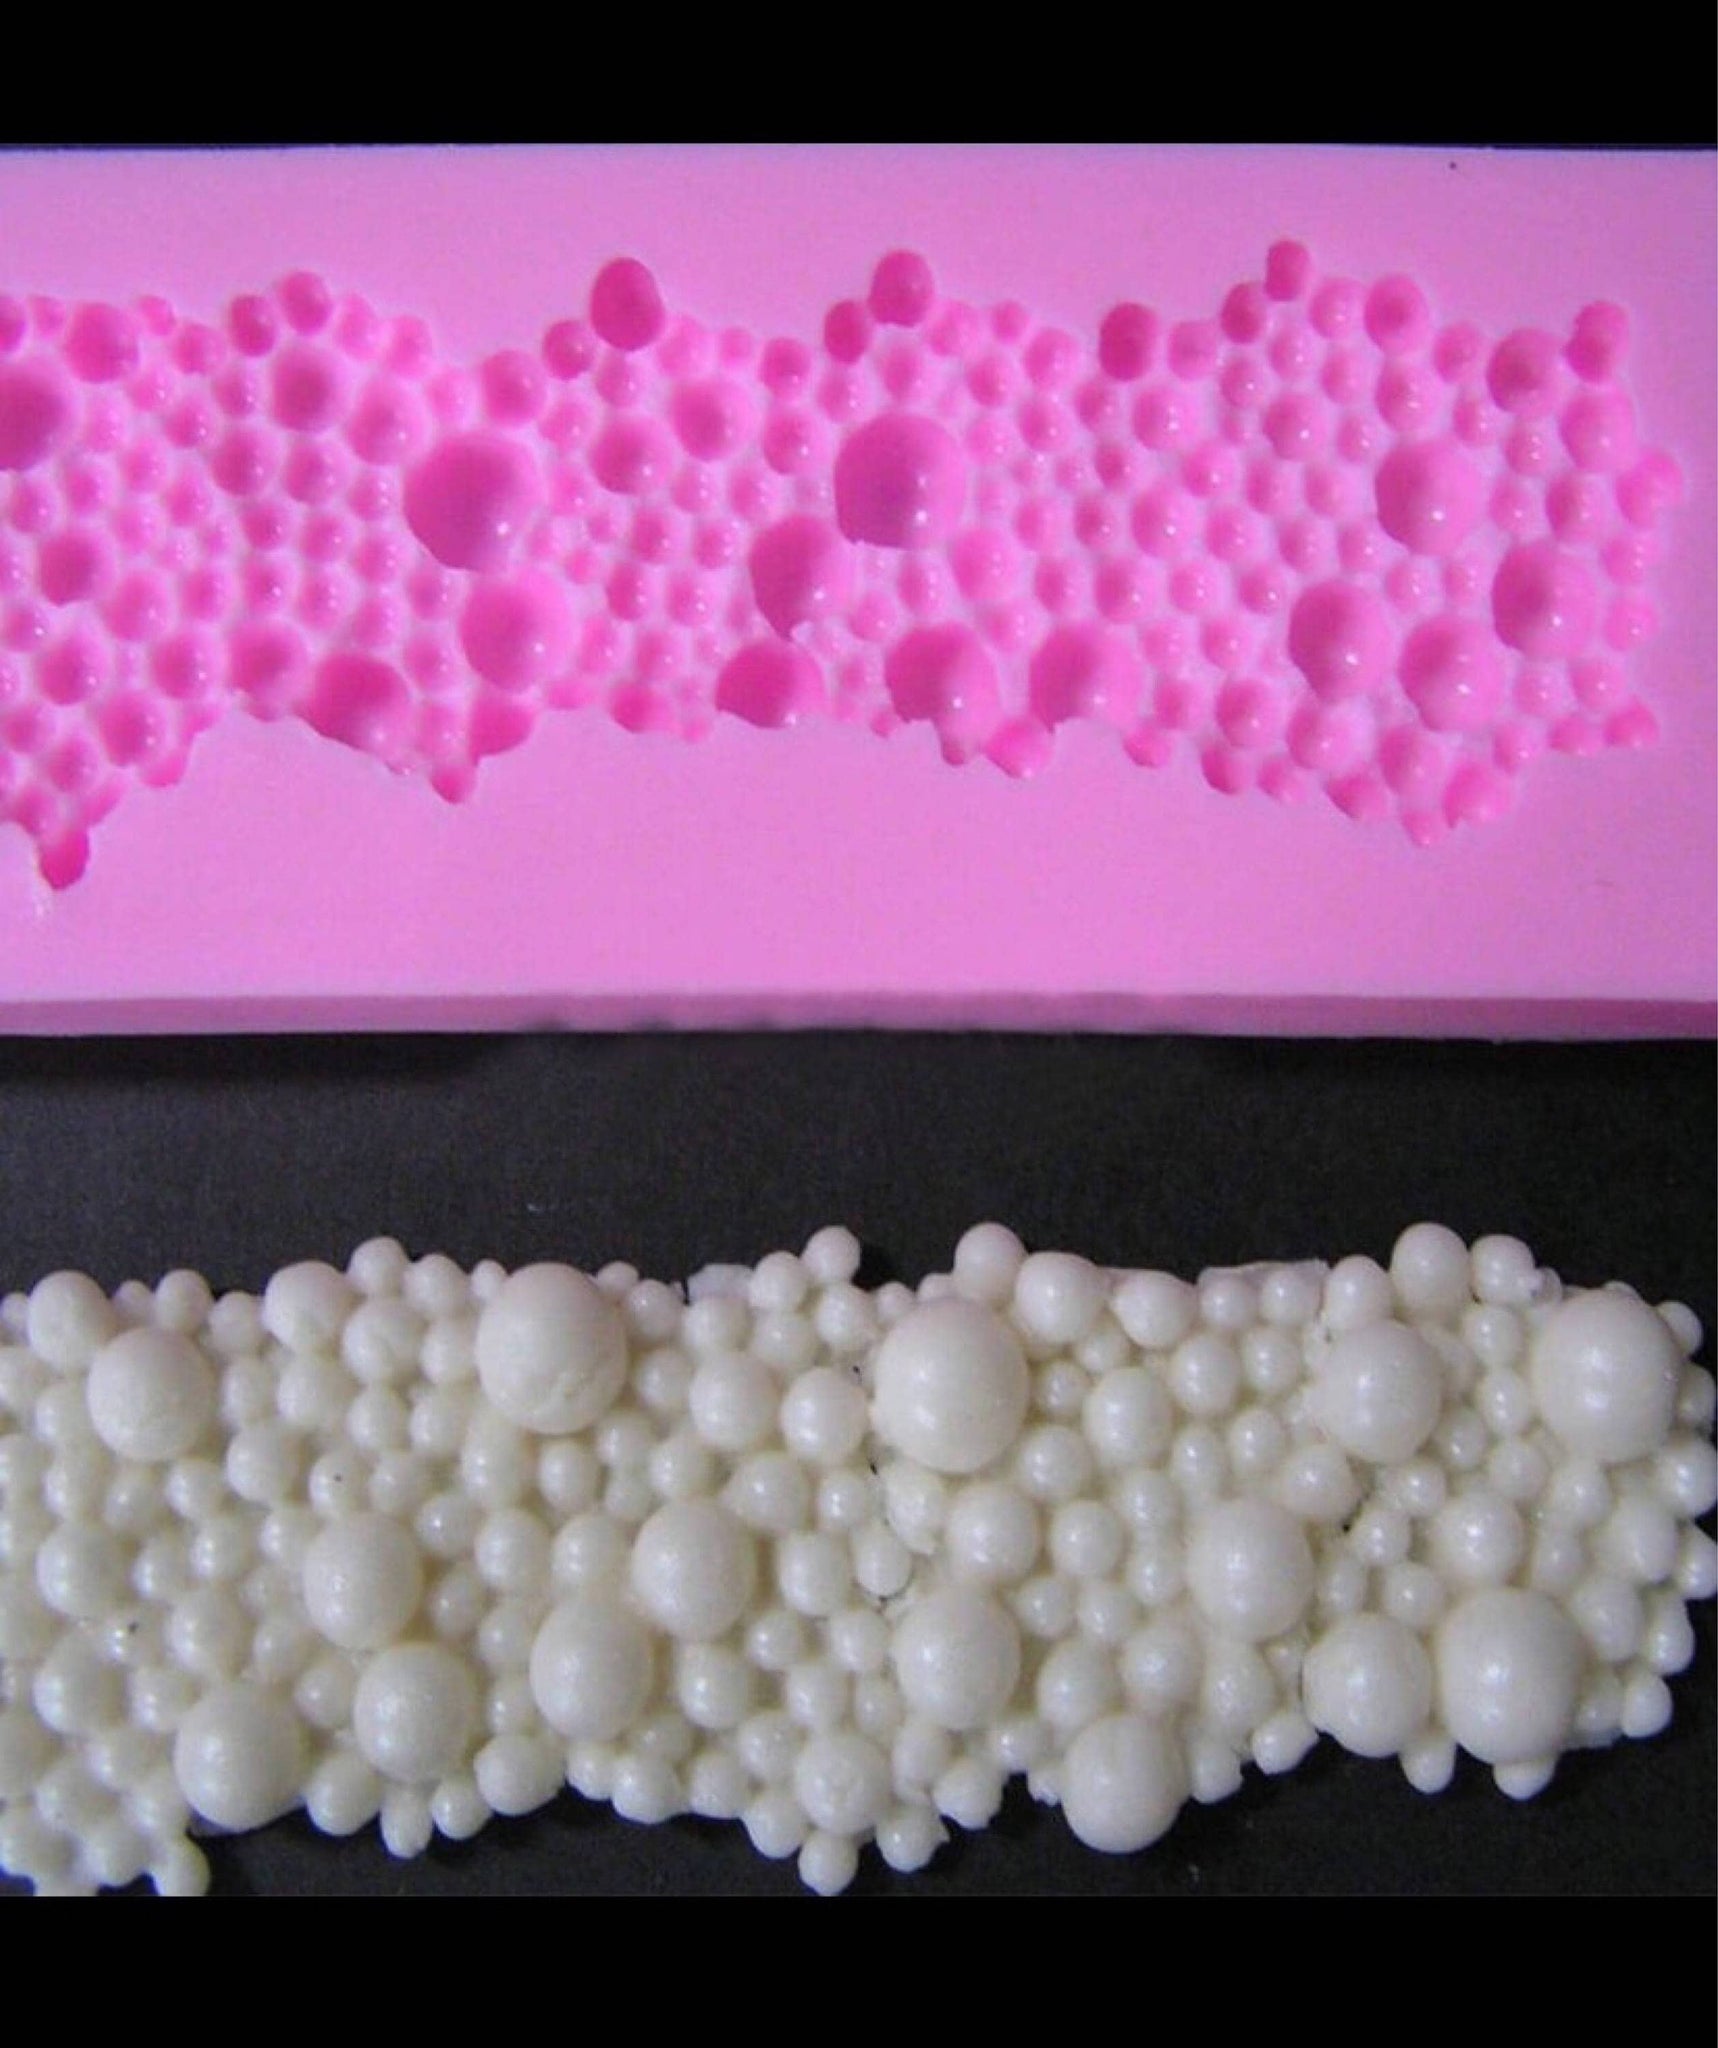 Pearl 3D Silicone Neckalace Mold - Fondant - For Cake Decorating Tools